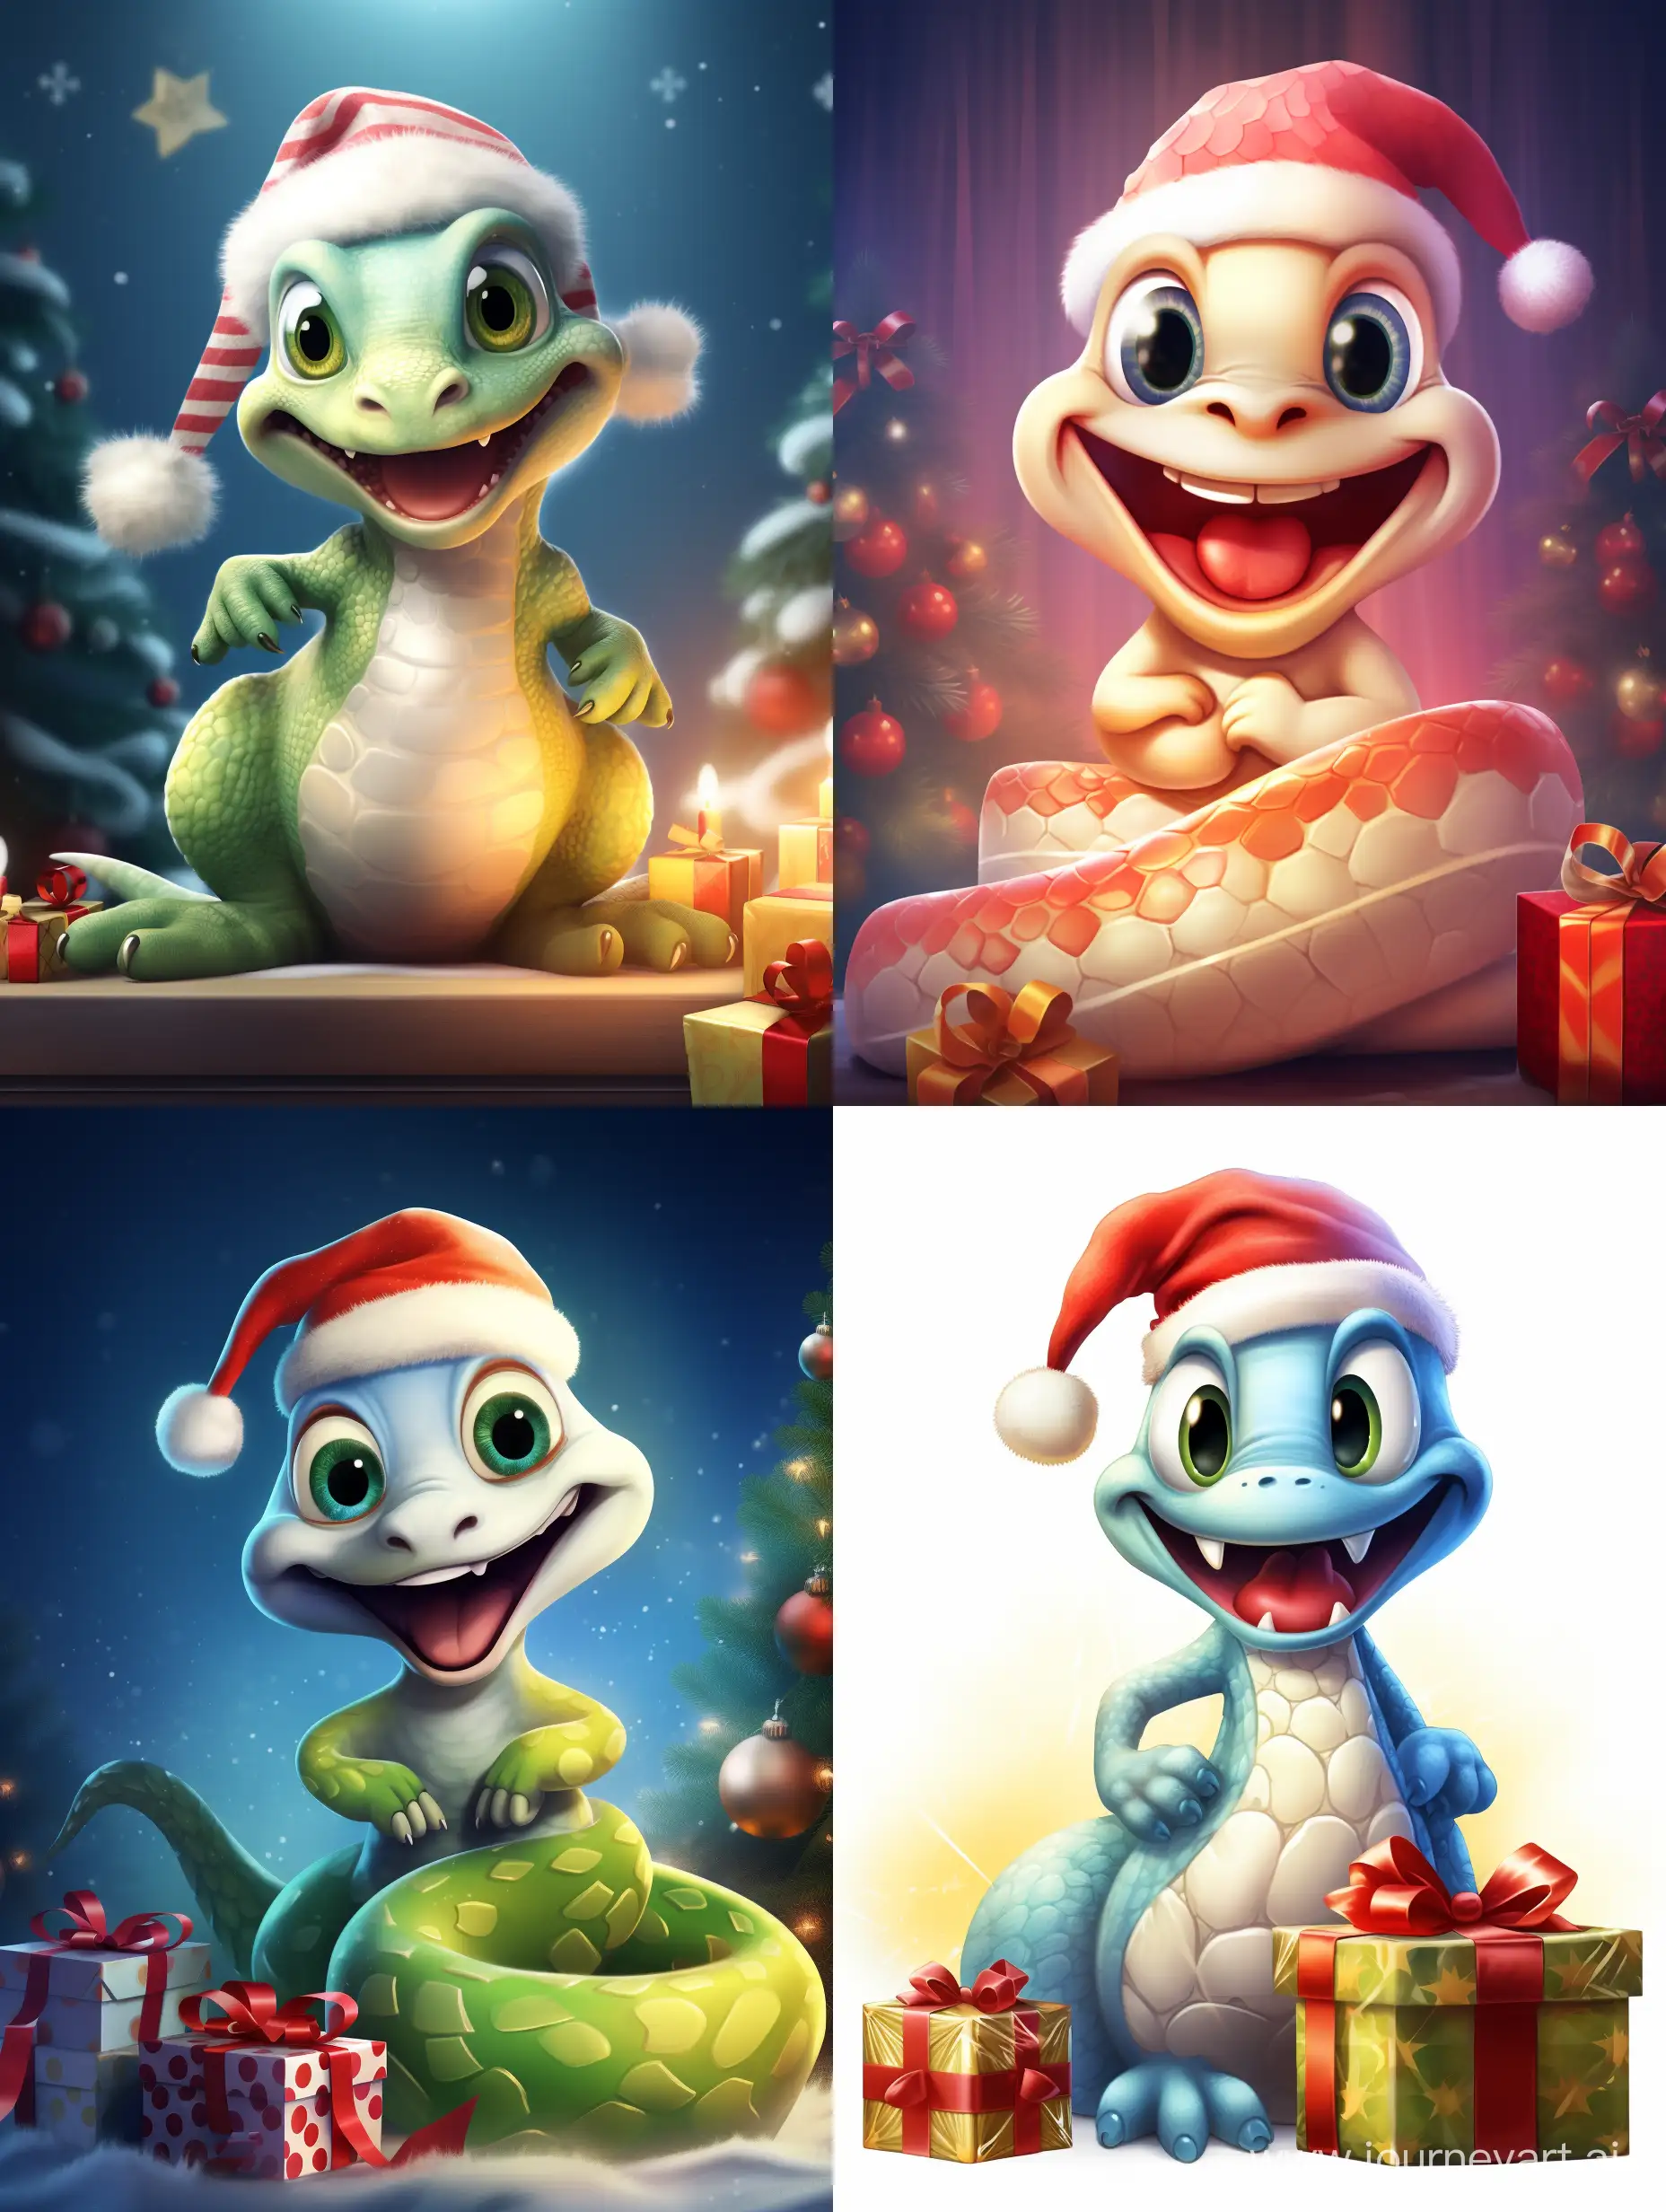 Adorable-PixarStyle-Snake-Celebrating-Christmas-with-Gifts-and-Tree